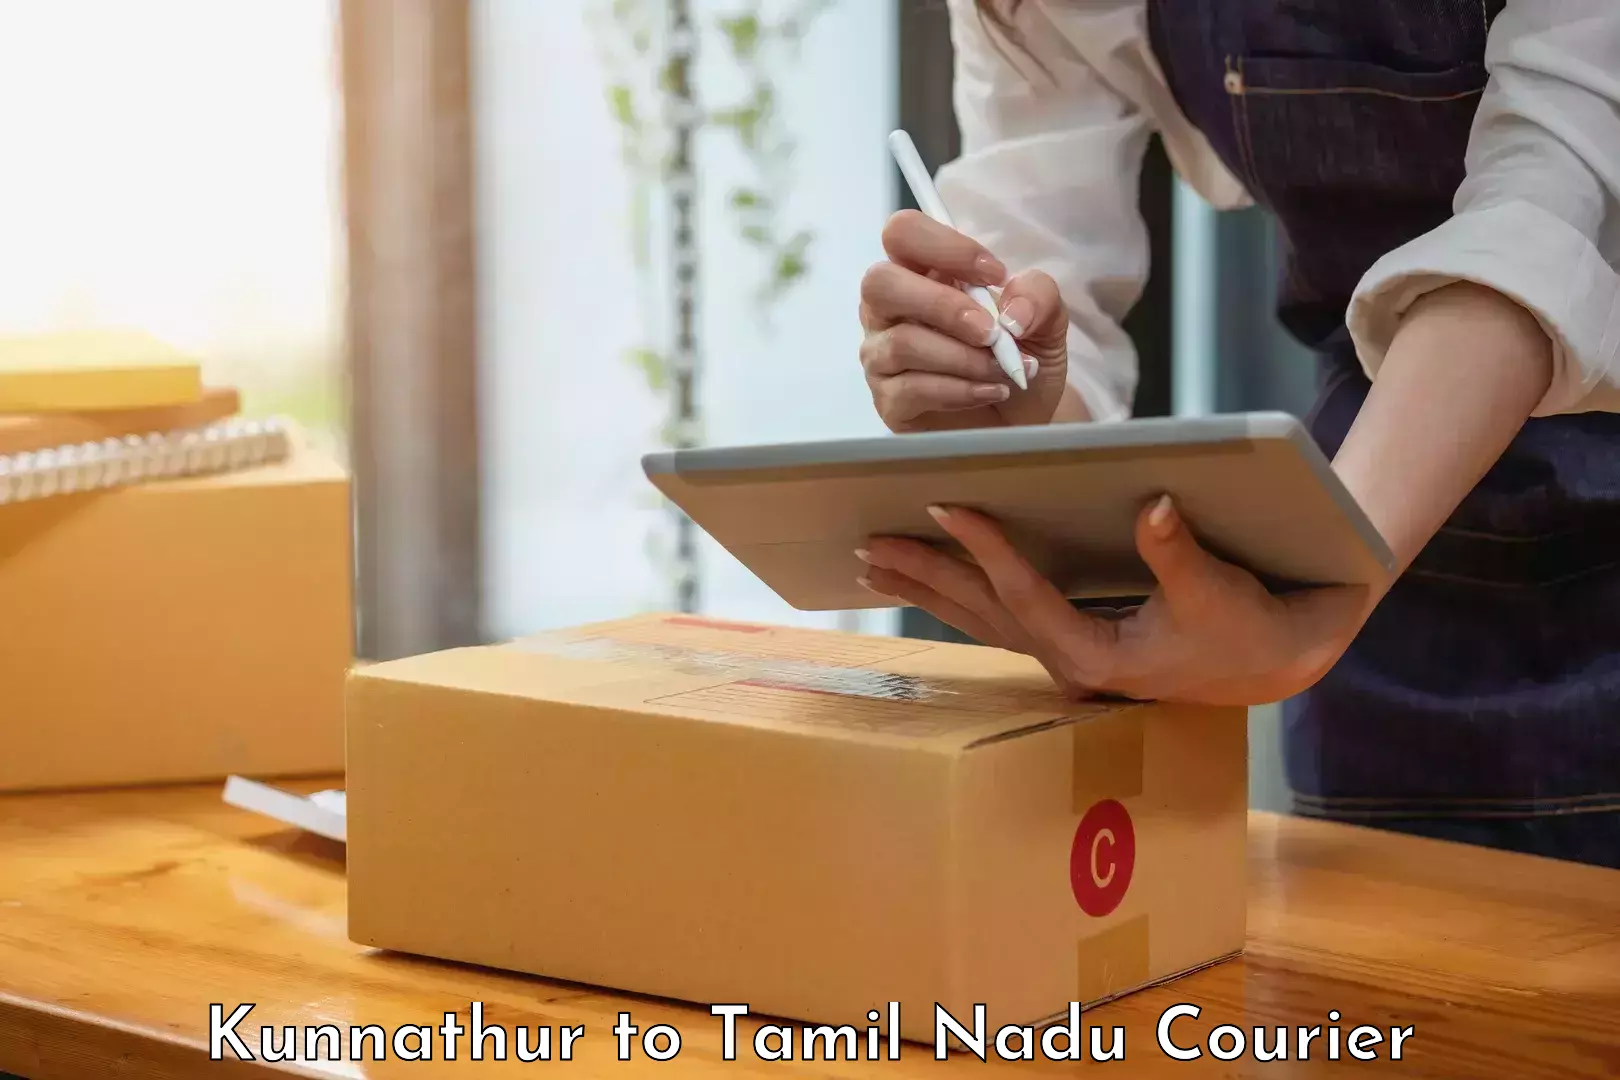 International courier networks Kunnathur to Chennai